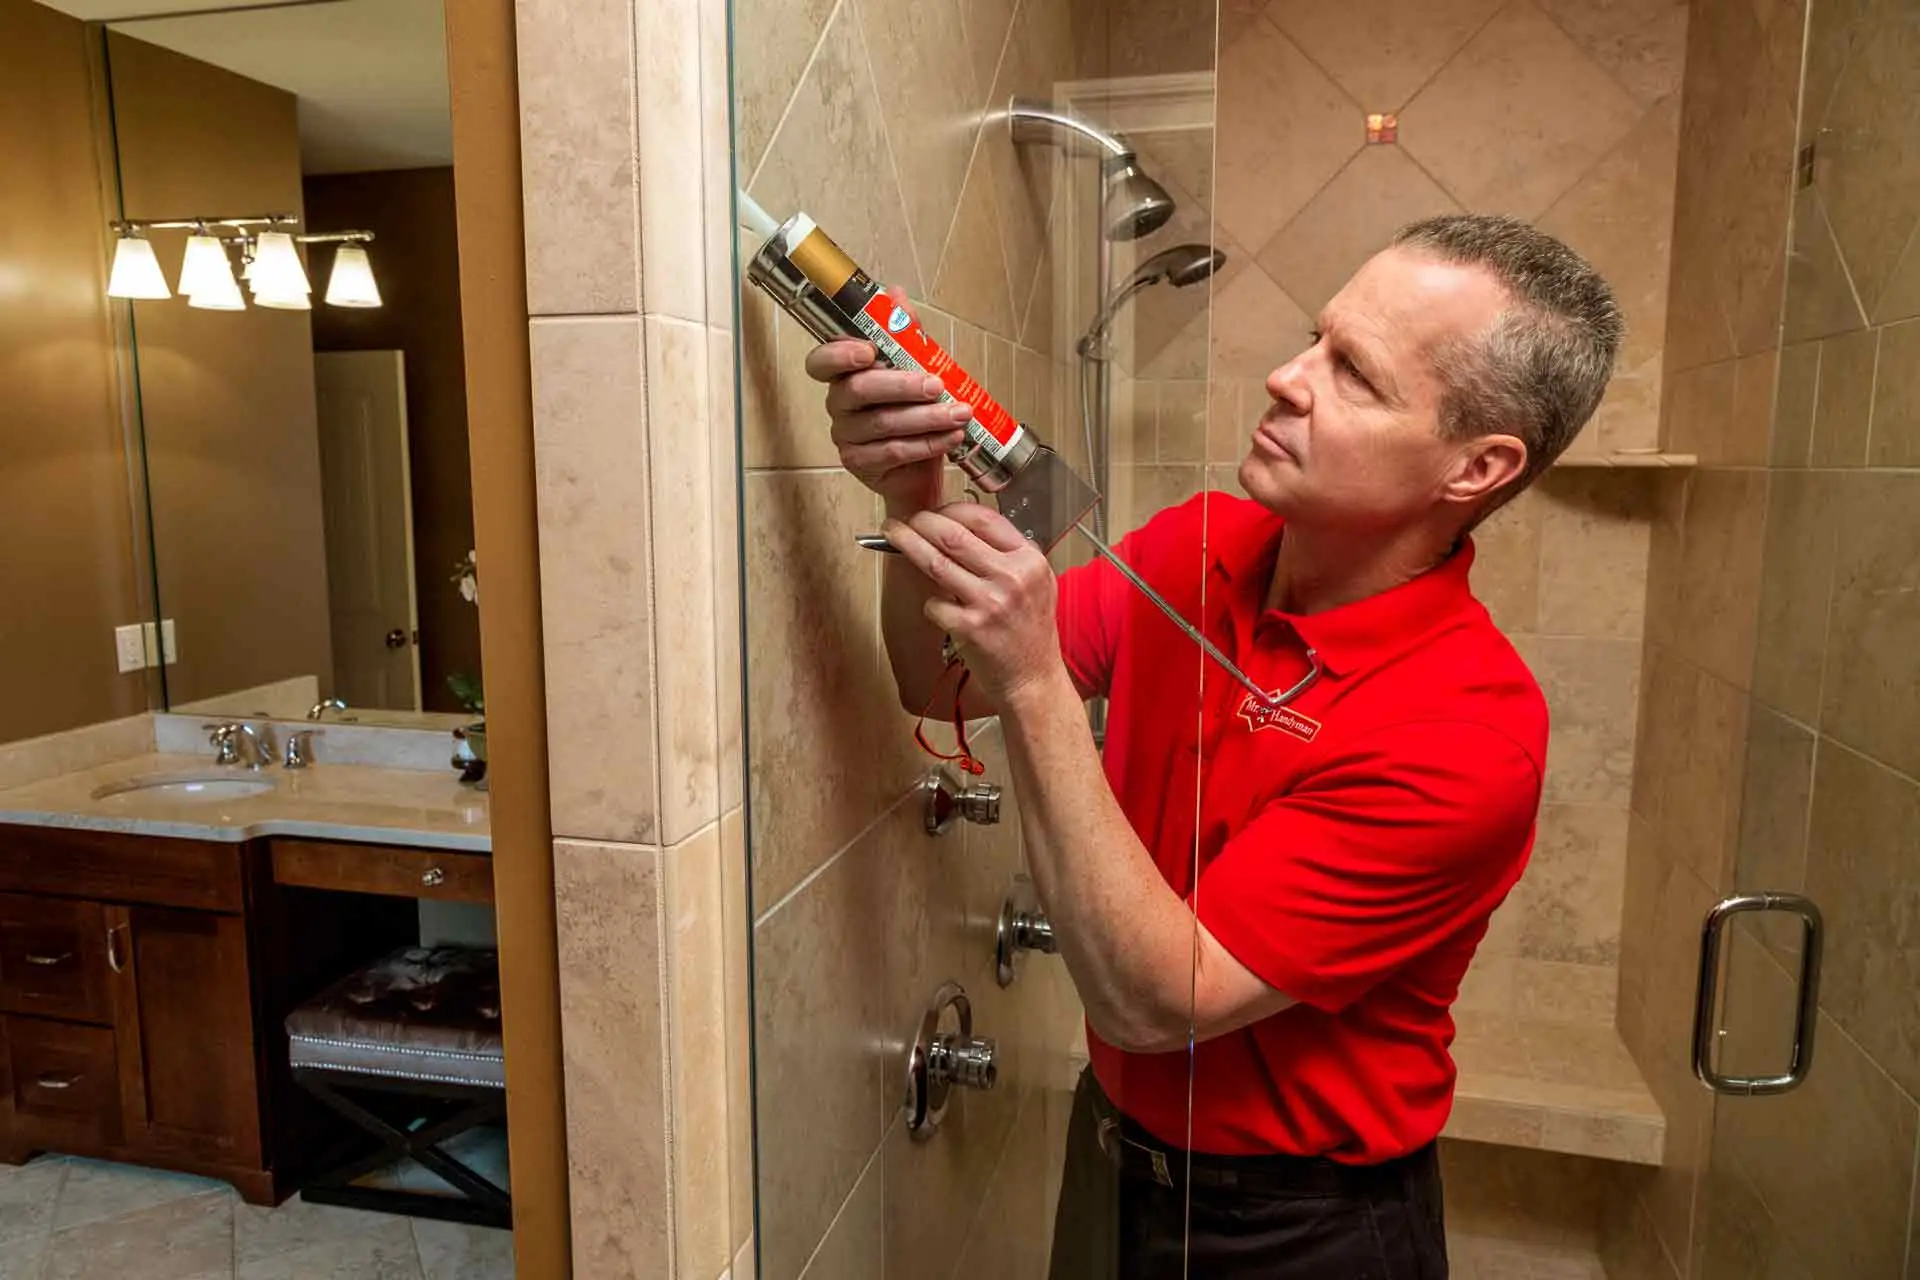 A handyman from Mr. Handyman using a caulking gun to seal the gap between a newly installed glass shower door and the tile shower wall nearby.